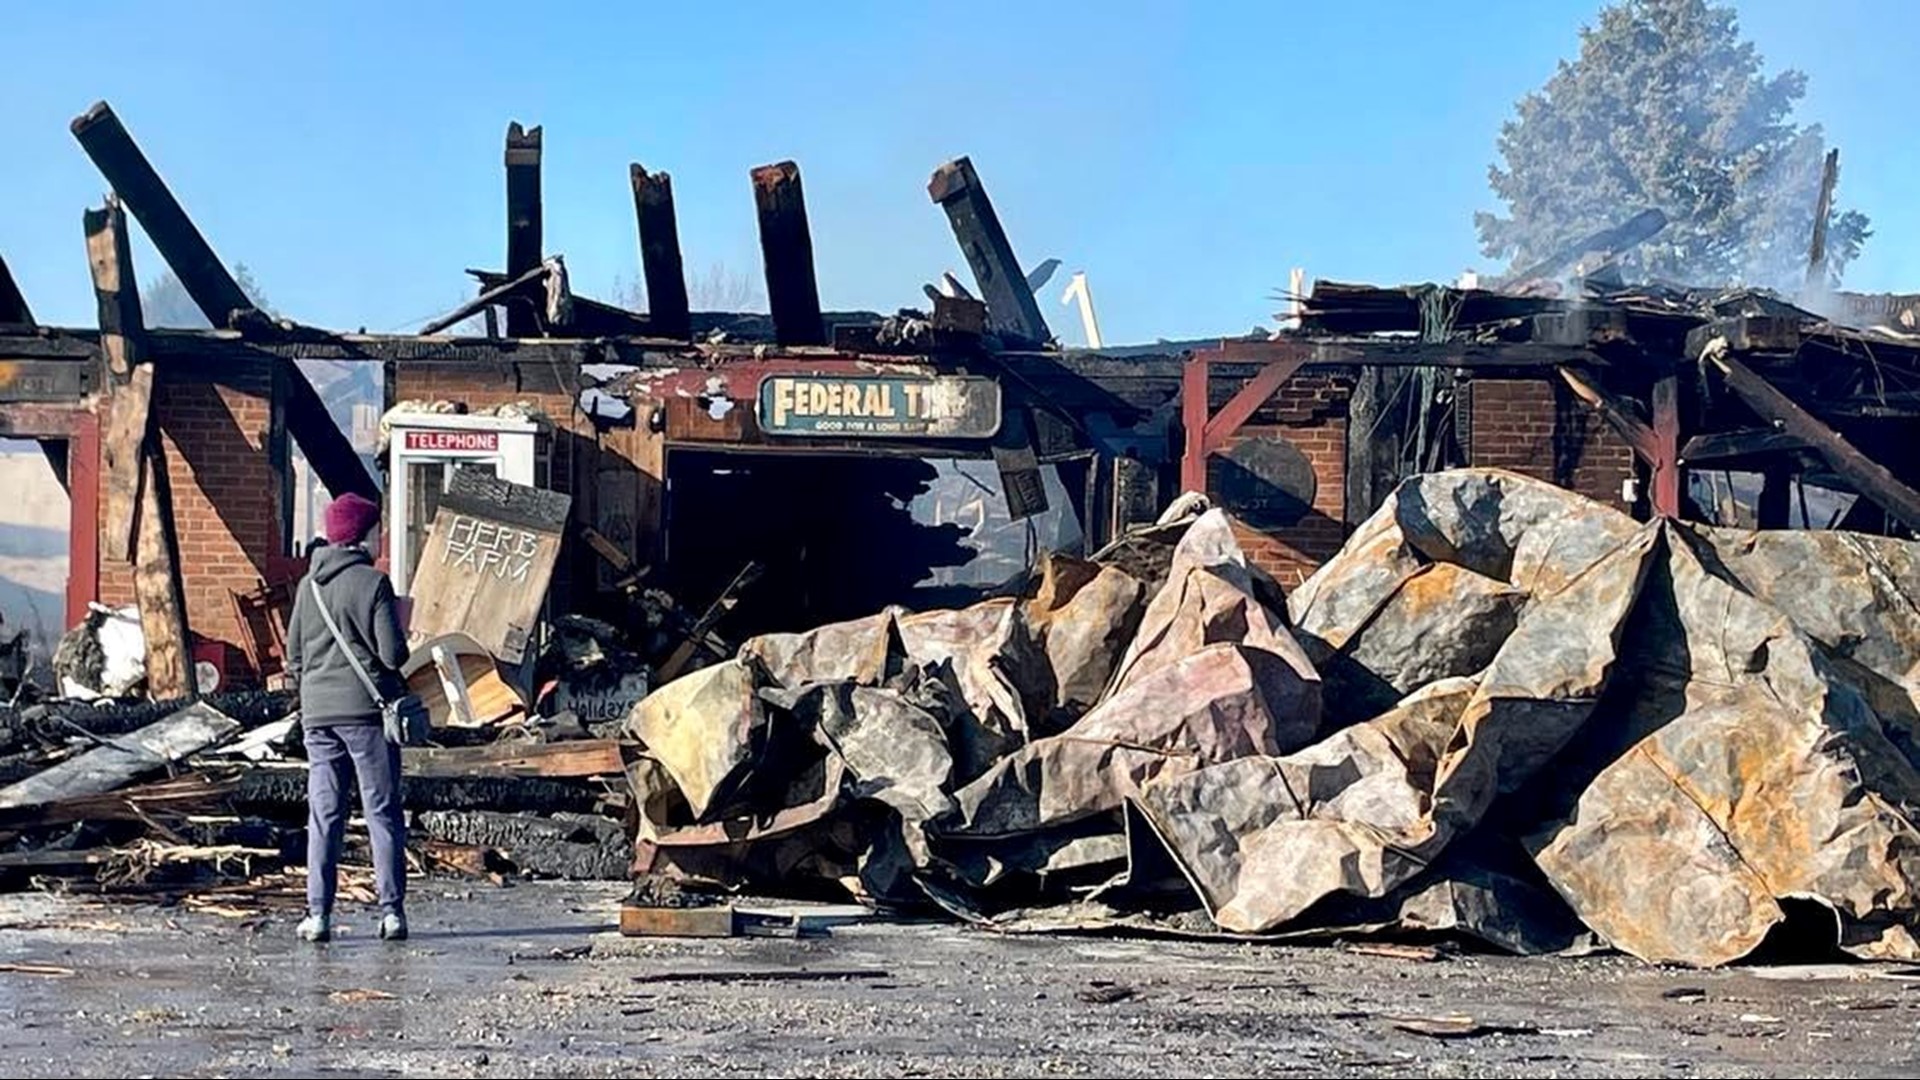 The remains of Ma’s General Store were still smoldering Wednesday morning as owner Kathy Briner surveyed the damage. “This was my life," she said.